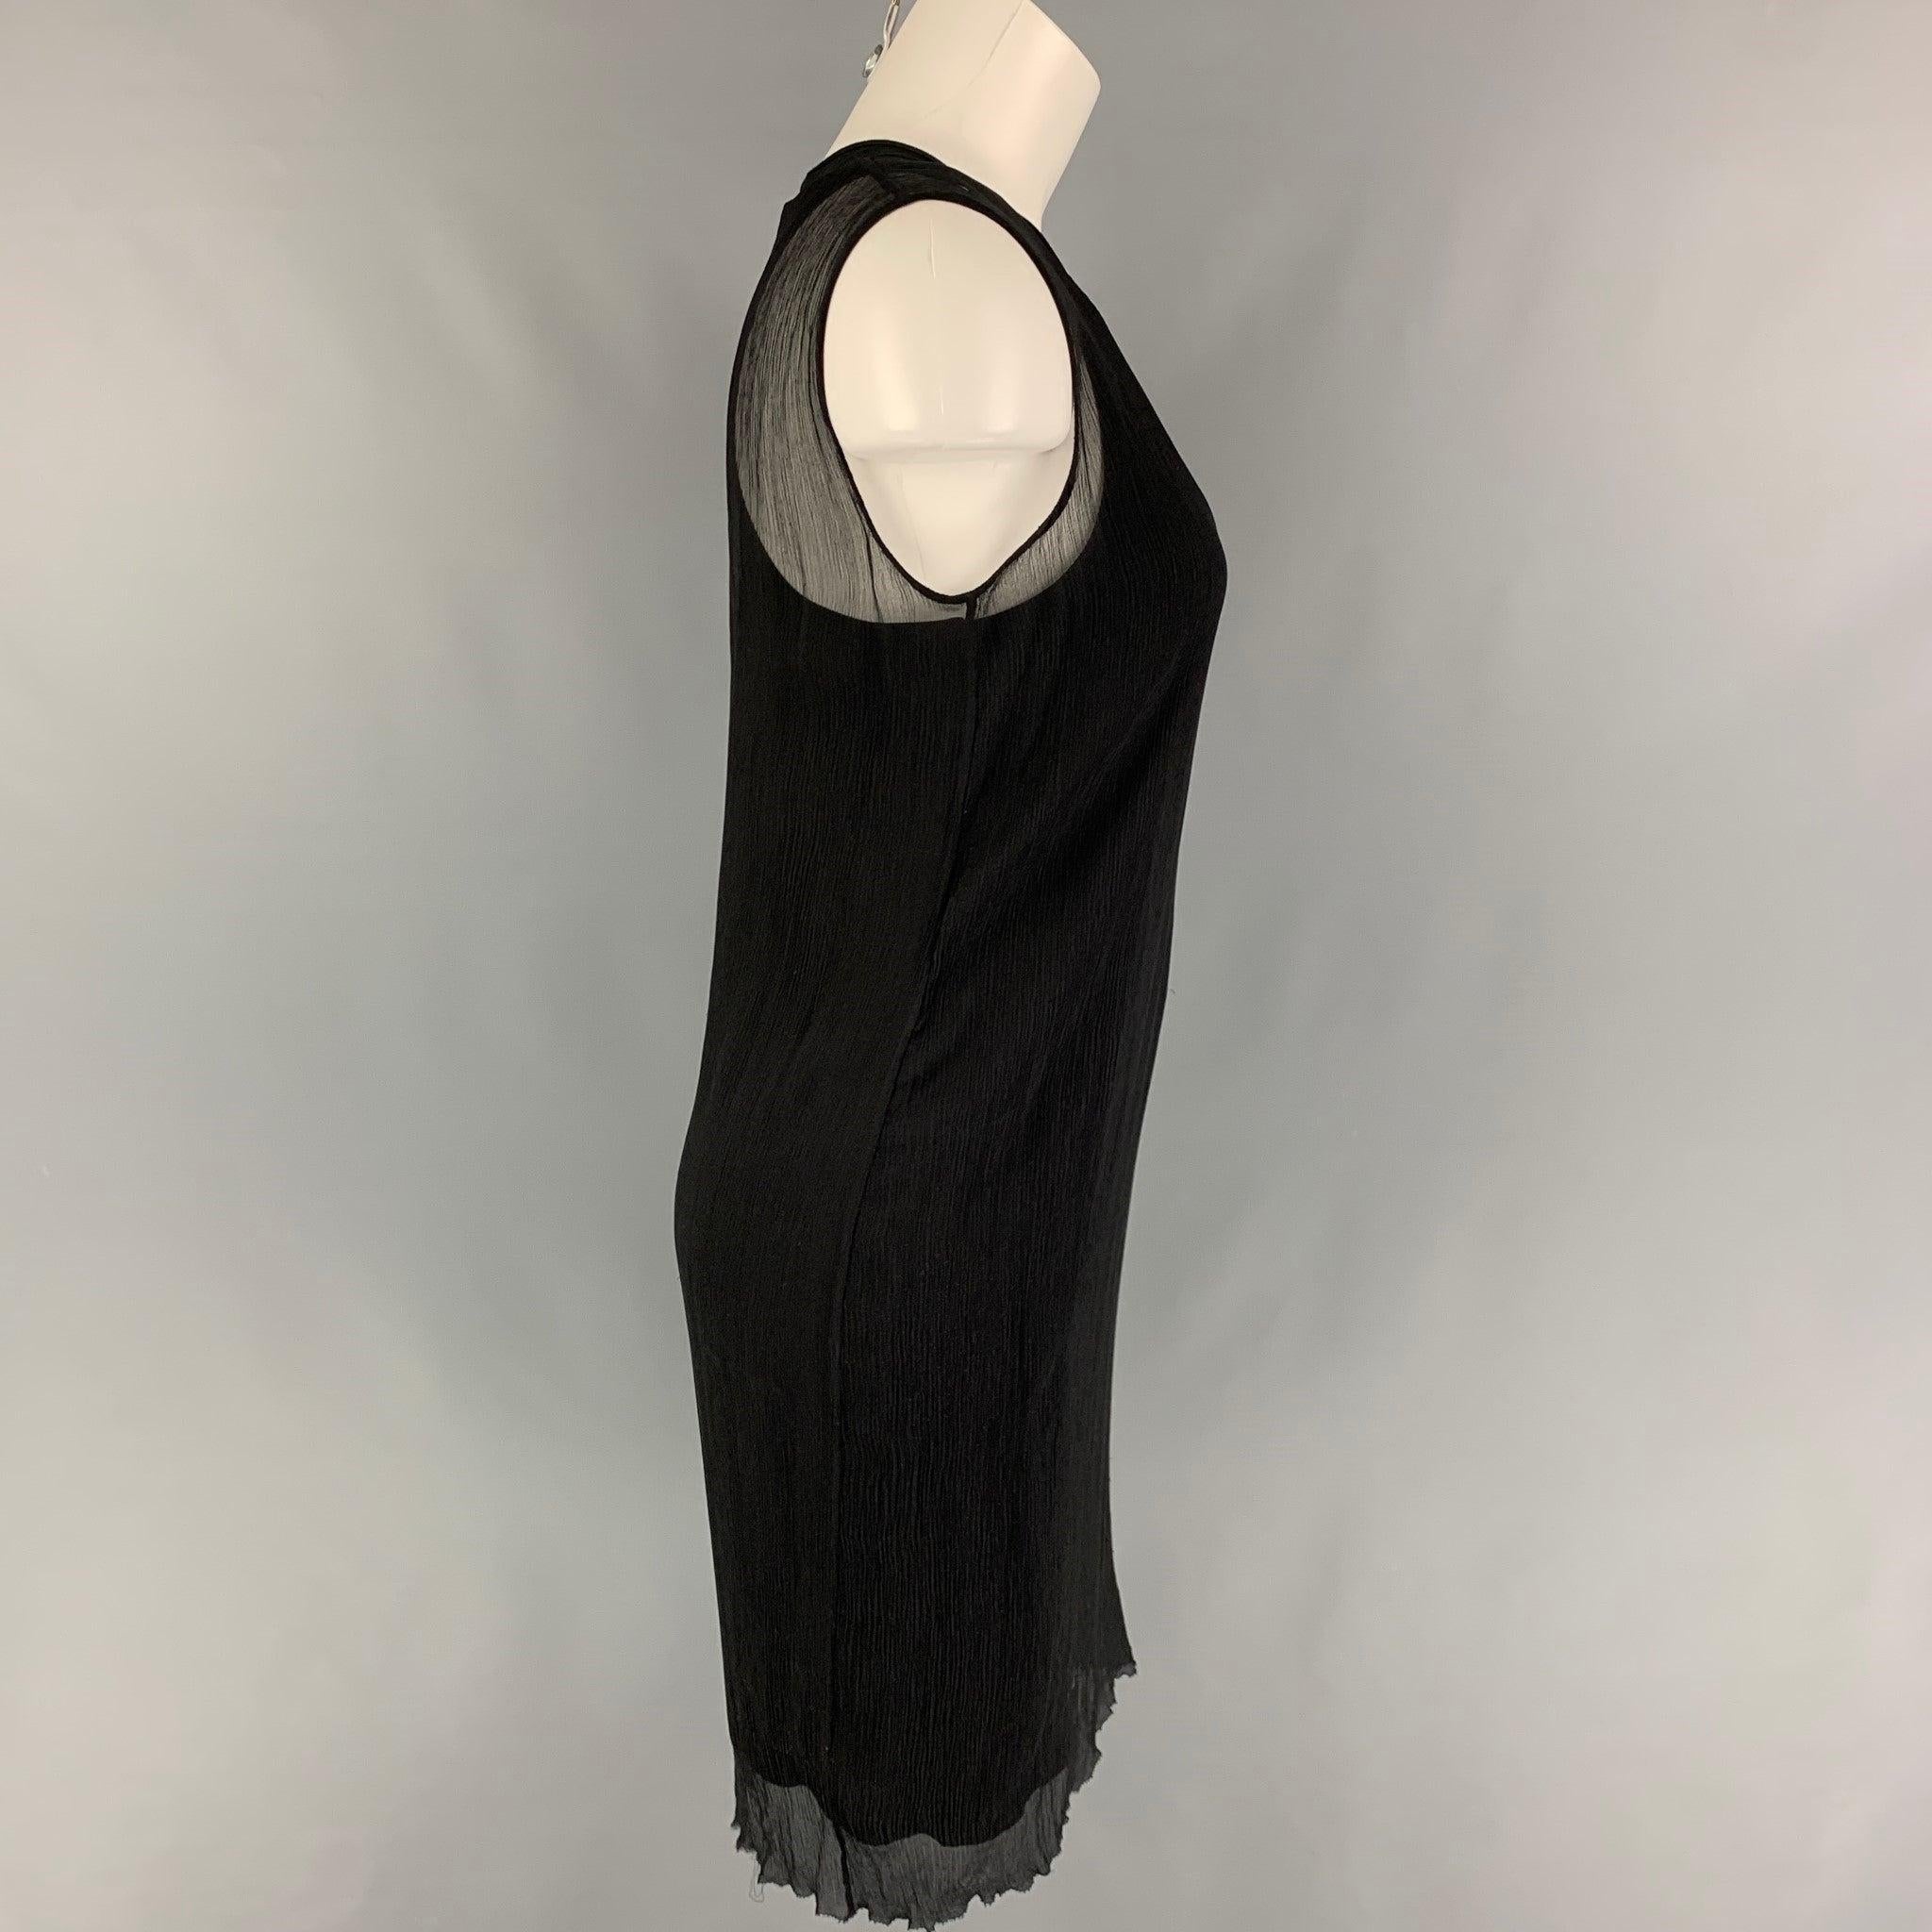 PORTS 1961 dress comes in a black wrinkled viscose featuring double layer style and no sleeves.
Very Good
Pre-Owned Condition. 

Marked:   4 

Measurements: 
 
Shoulder: 14 inches  Bust: 32 inches  Hip: 36 inches  Length: 37 inches 
  
  
